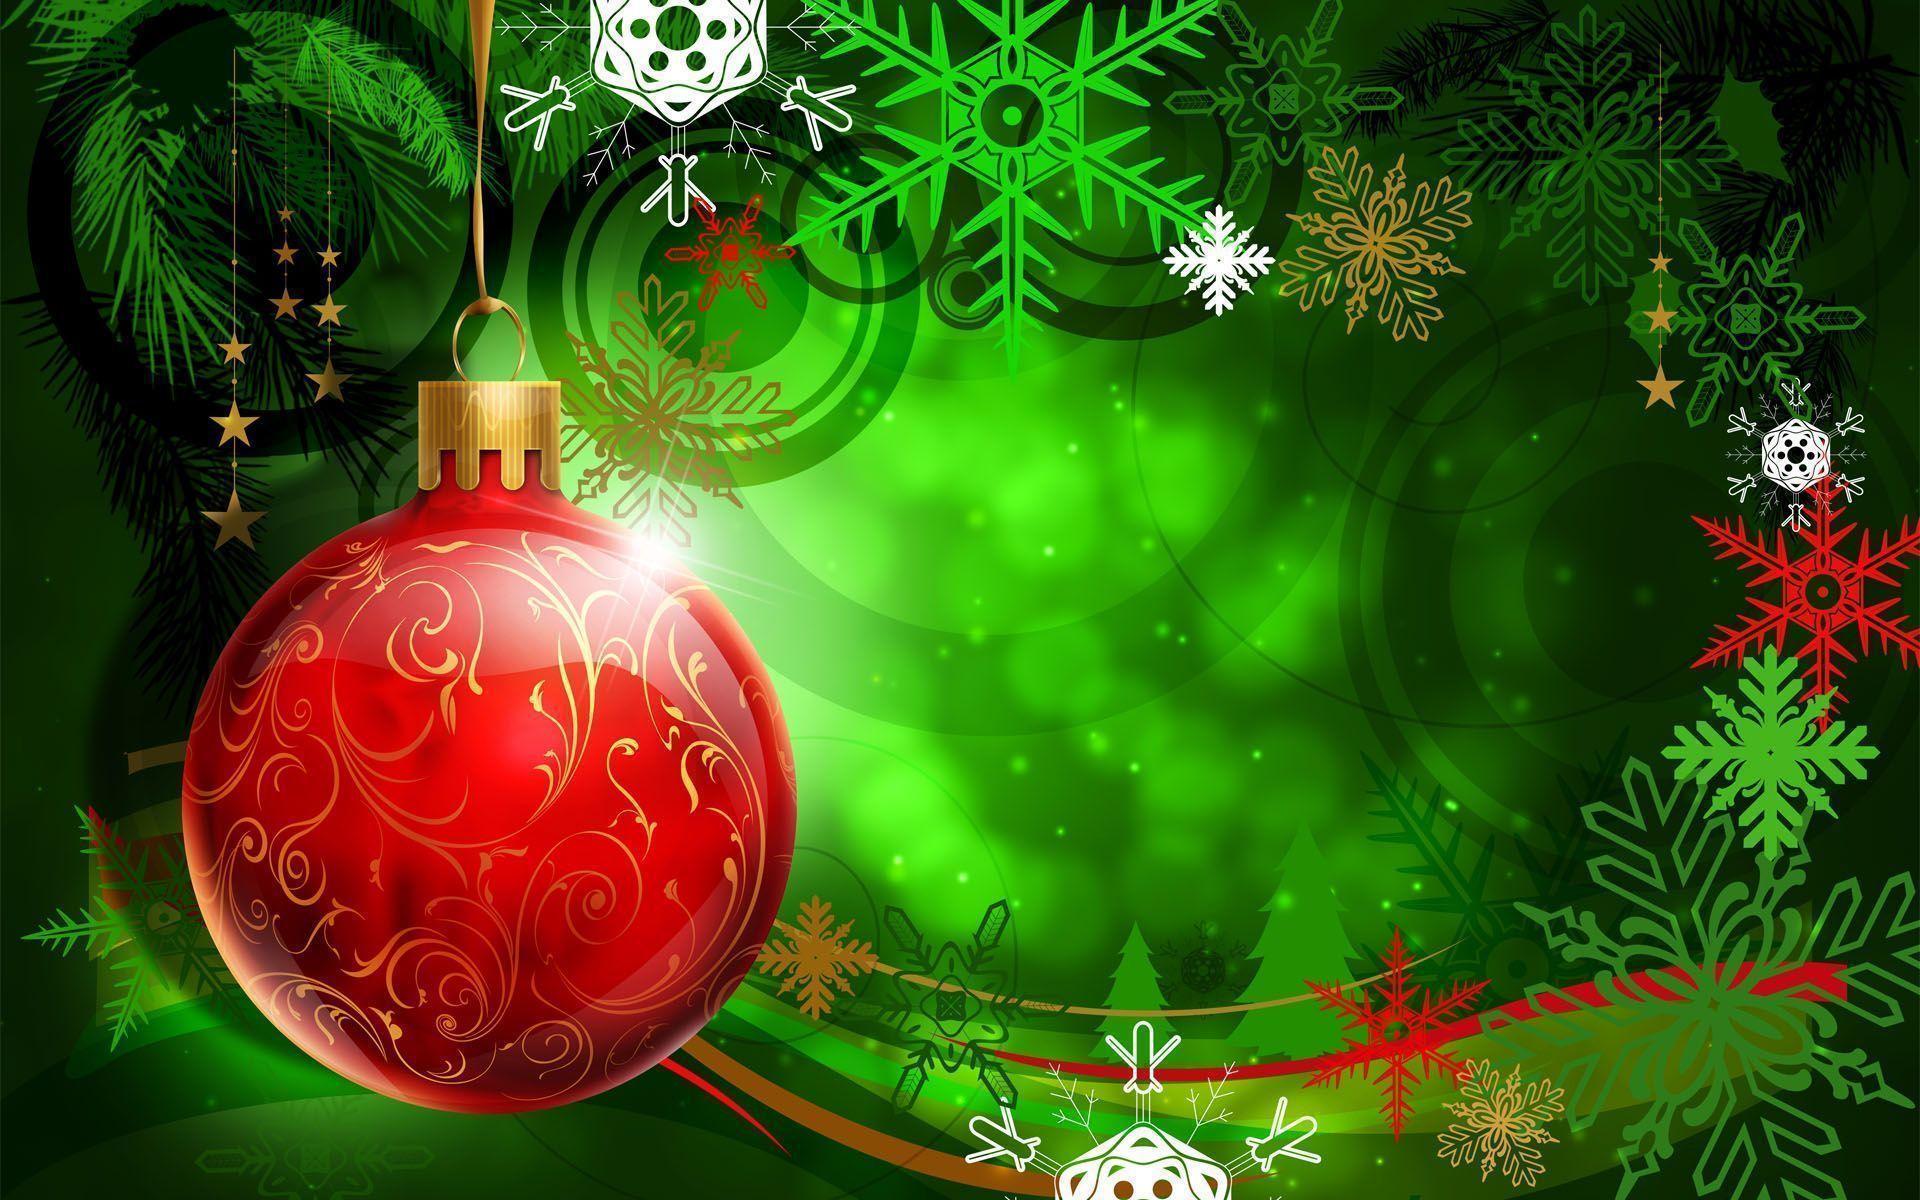 Hd Colorful Christmas Decoration Screensaver Background. taken